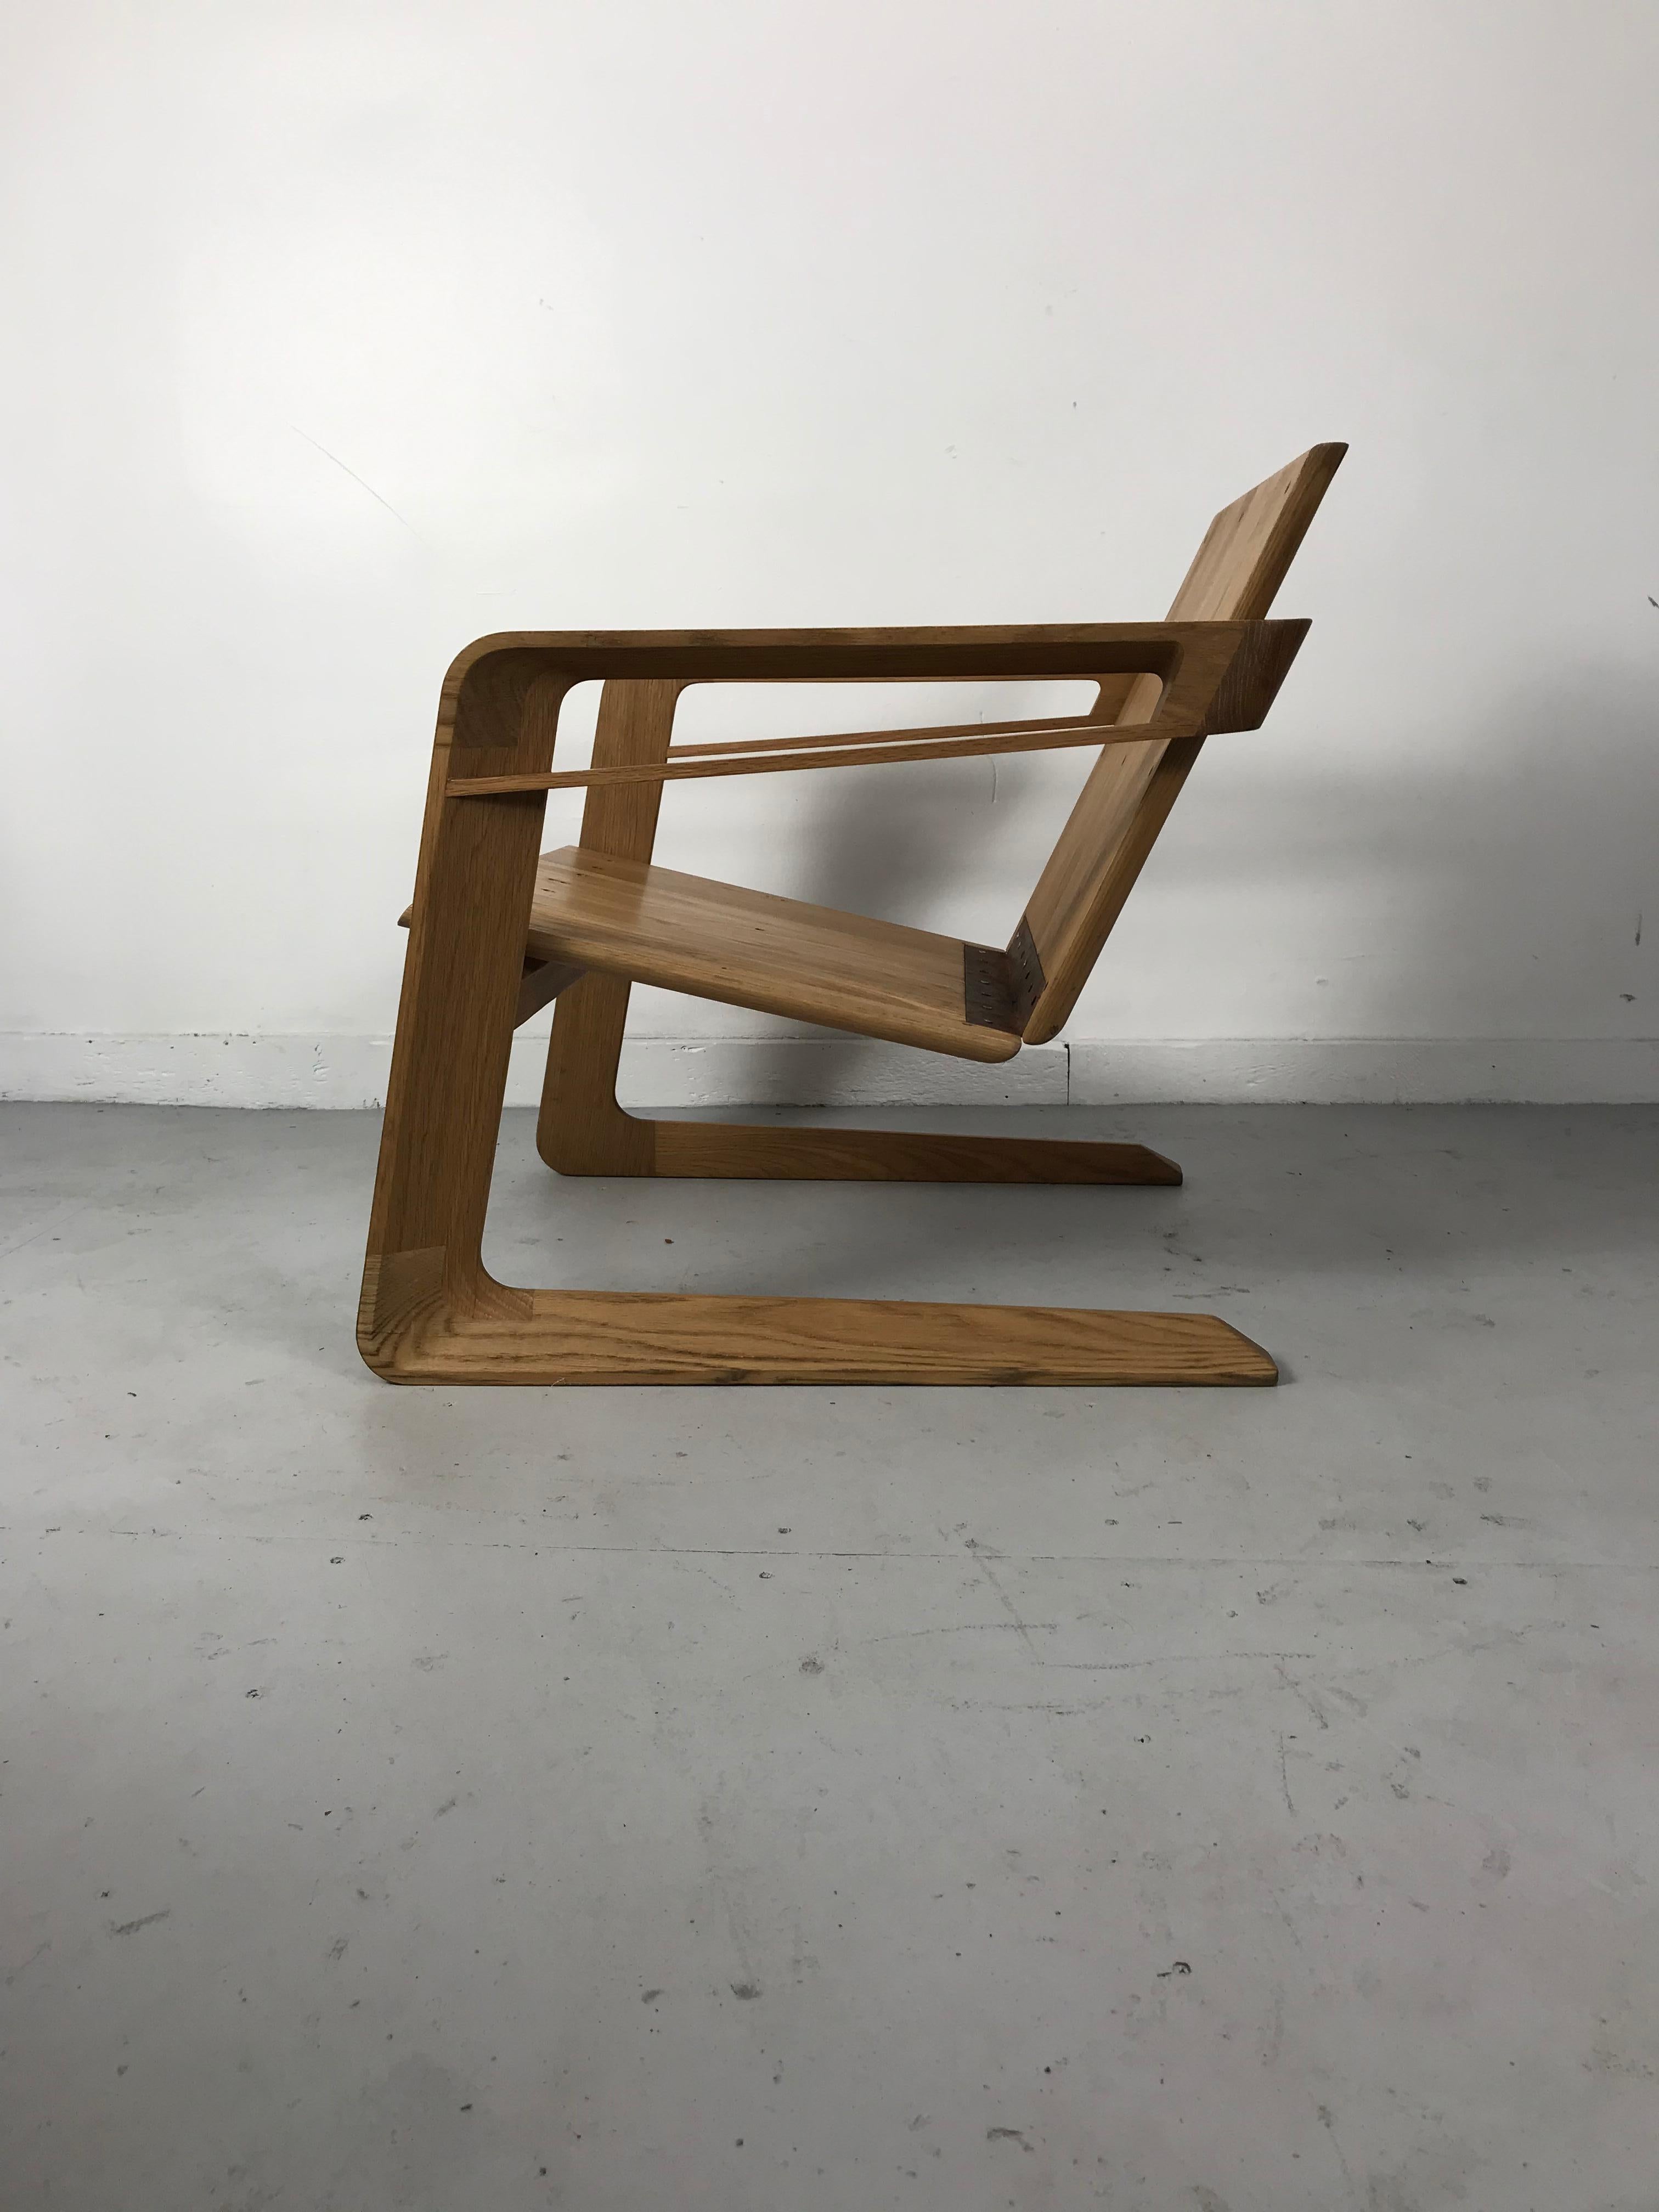 Metal Cory Grosser 009 Airline Chair, After Famed 1934 Airline Chair by Kem Weber For Sale